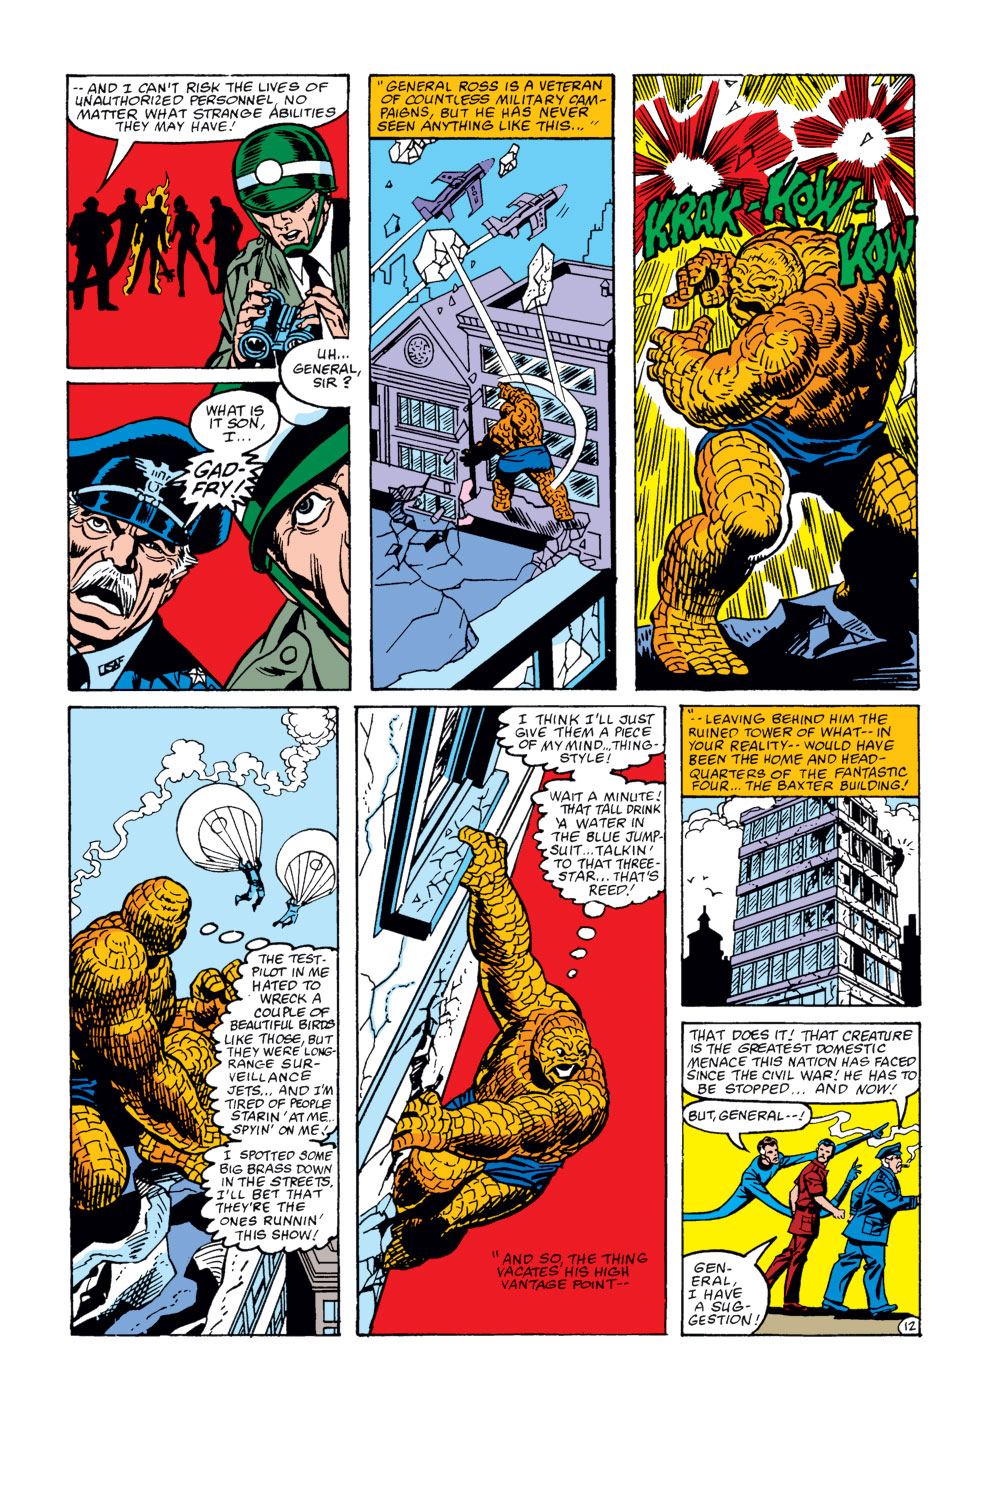 What If? (1977) issue 31 - Wolverine had killed the Hulk - Page 33